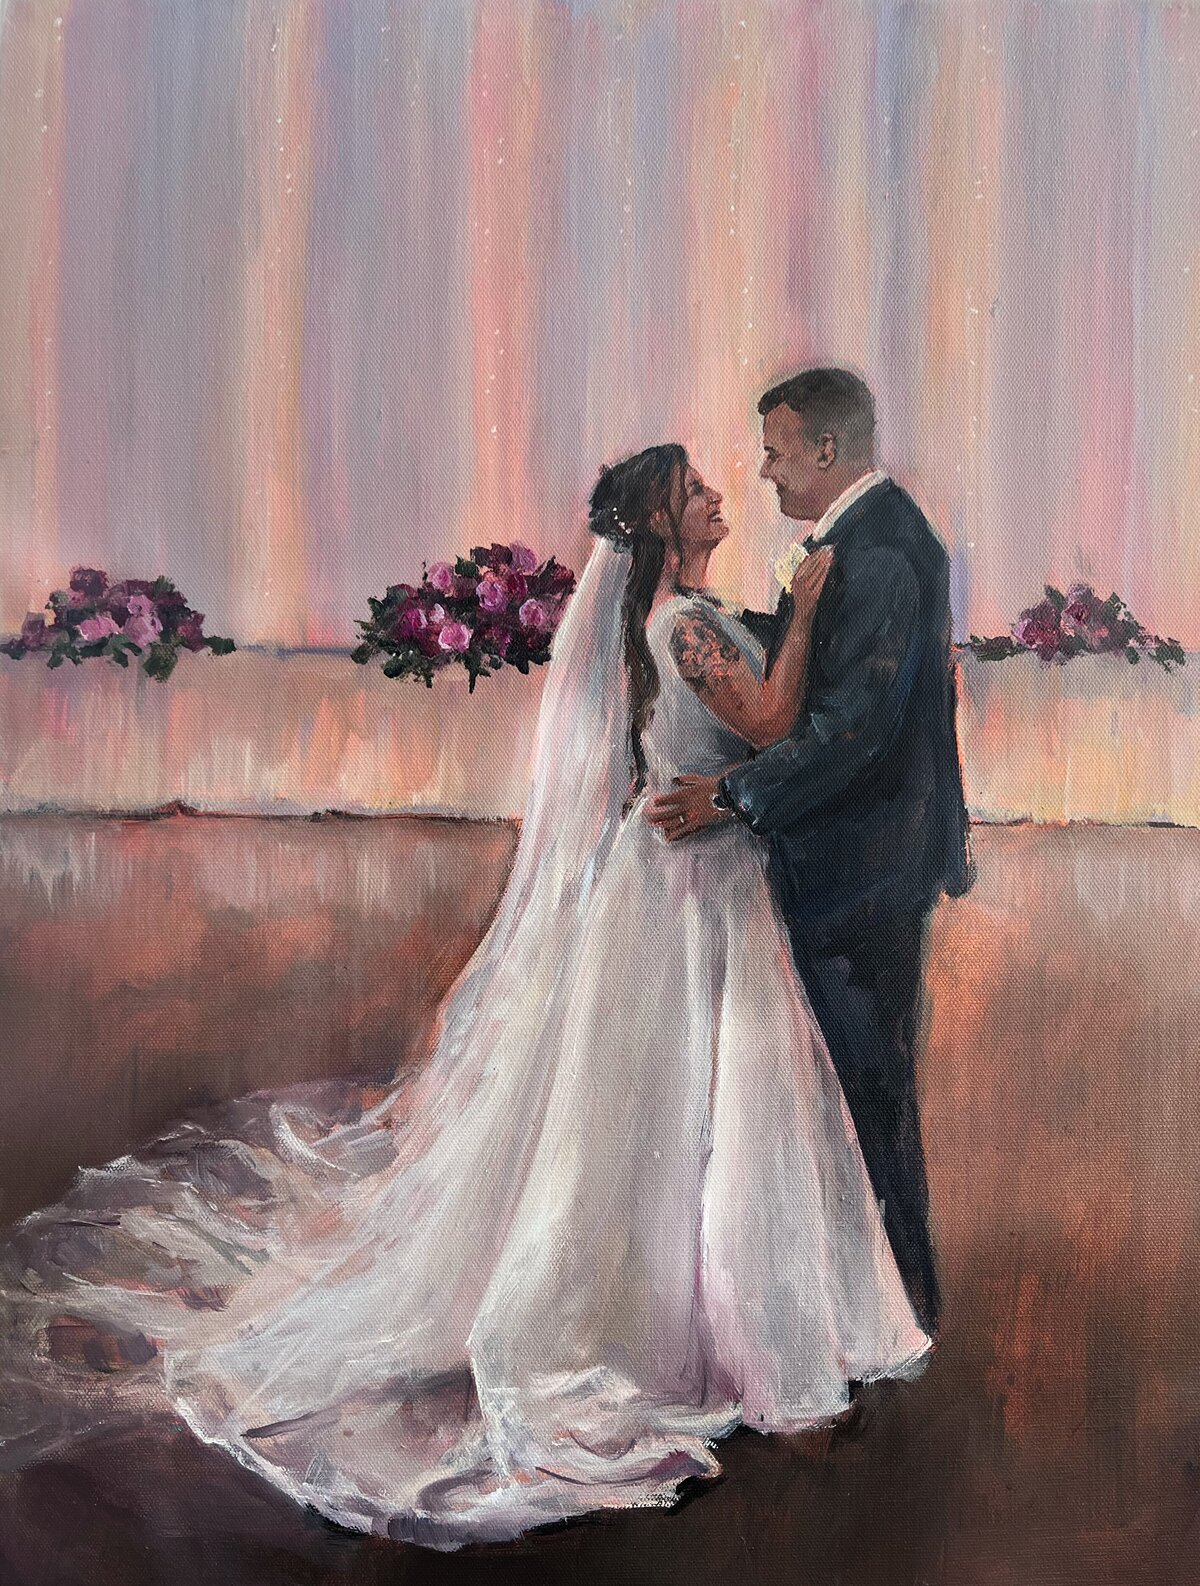 Live wedding painter in barrie